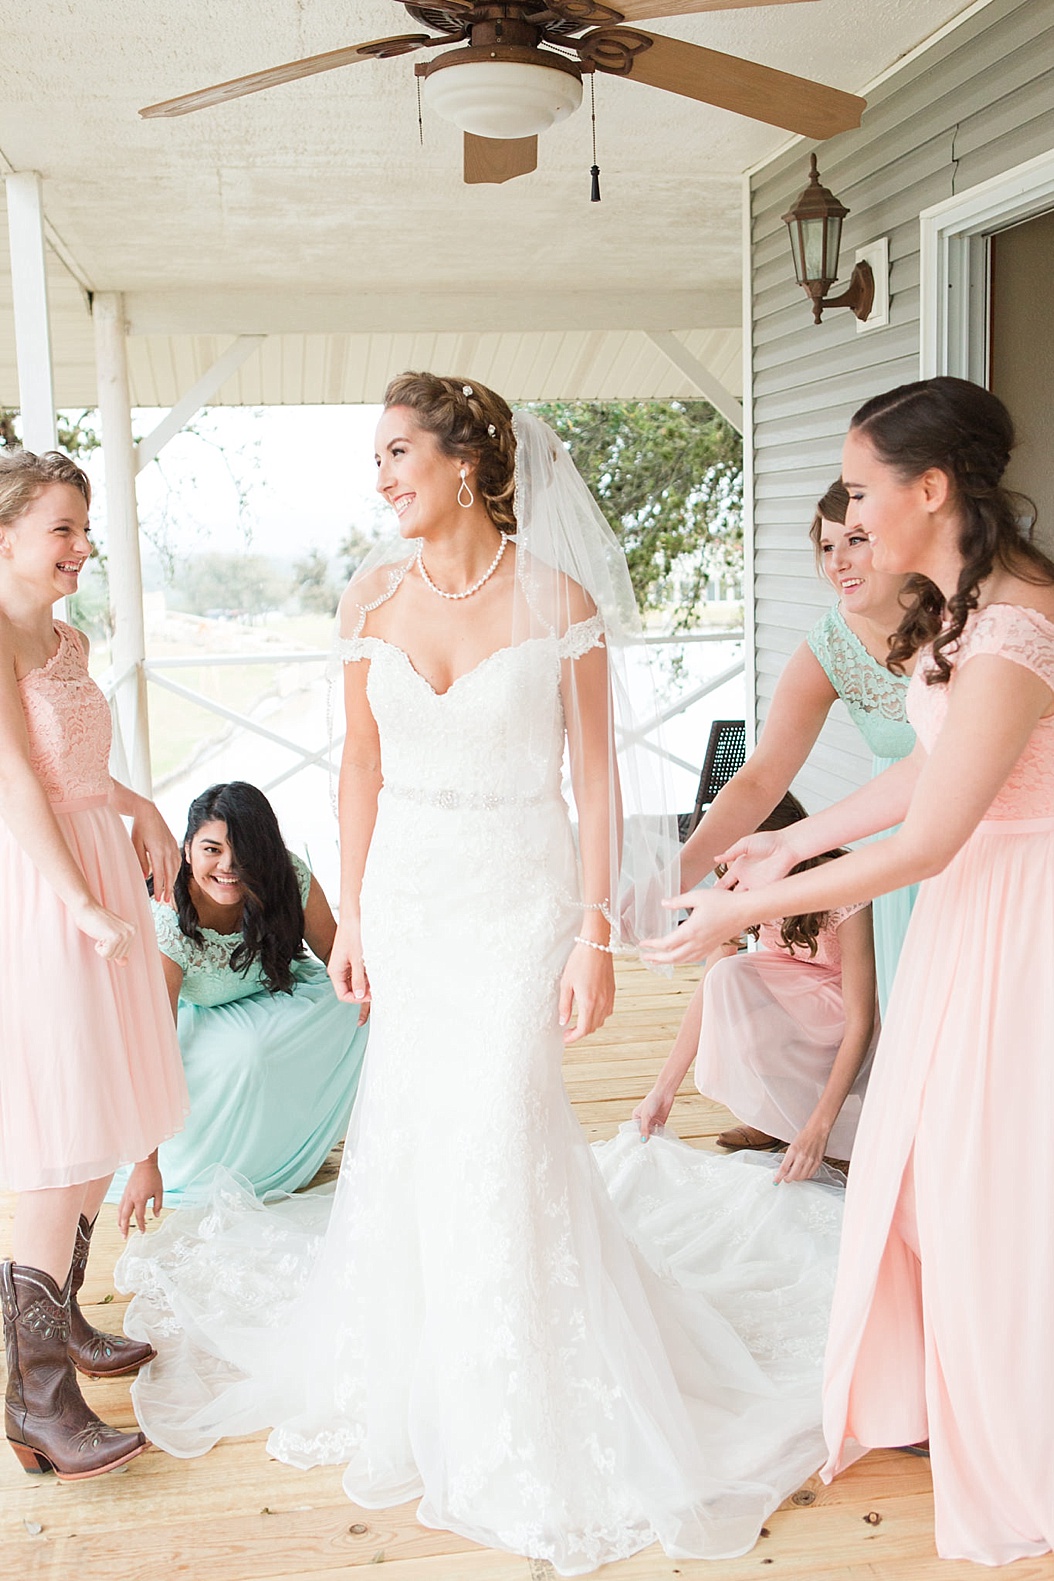 A Peach and Mint Country Chic Wedding at Happy H Ranch by Allison Jeffers Wedding Photography. Comfort Wedding Photographer 0016